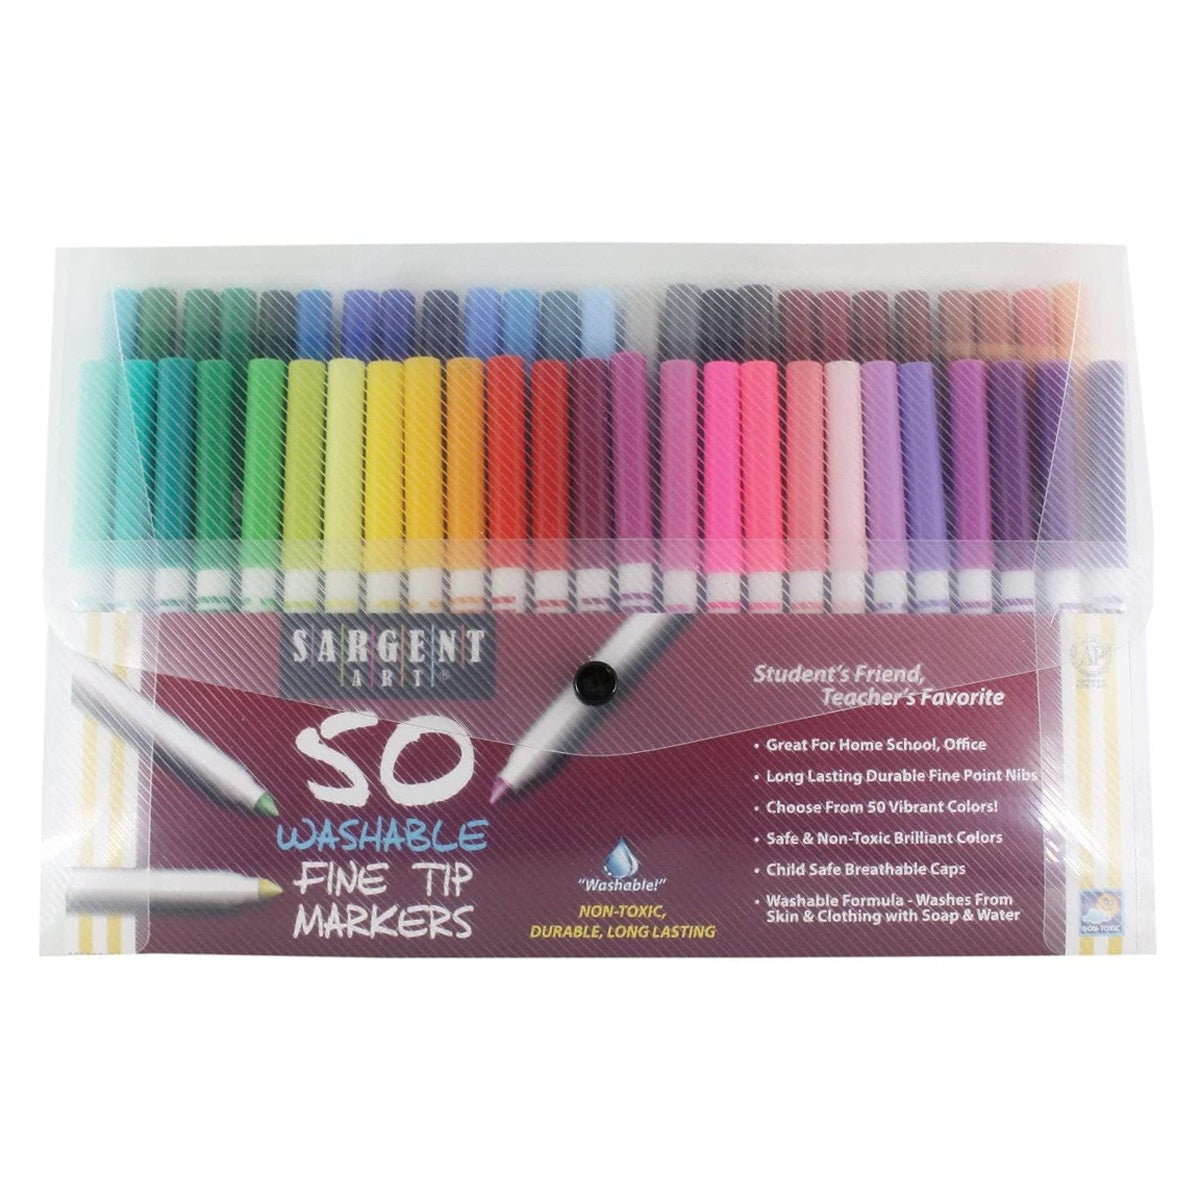 50ct Sargent Art Washable Nontoxic Fine Tip Markers In Carry Case